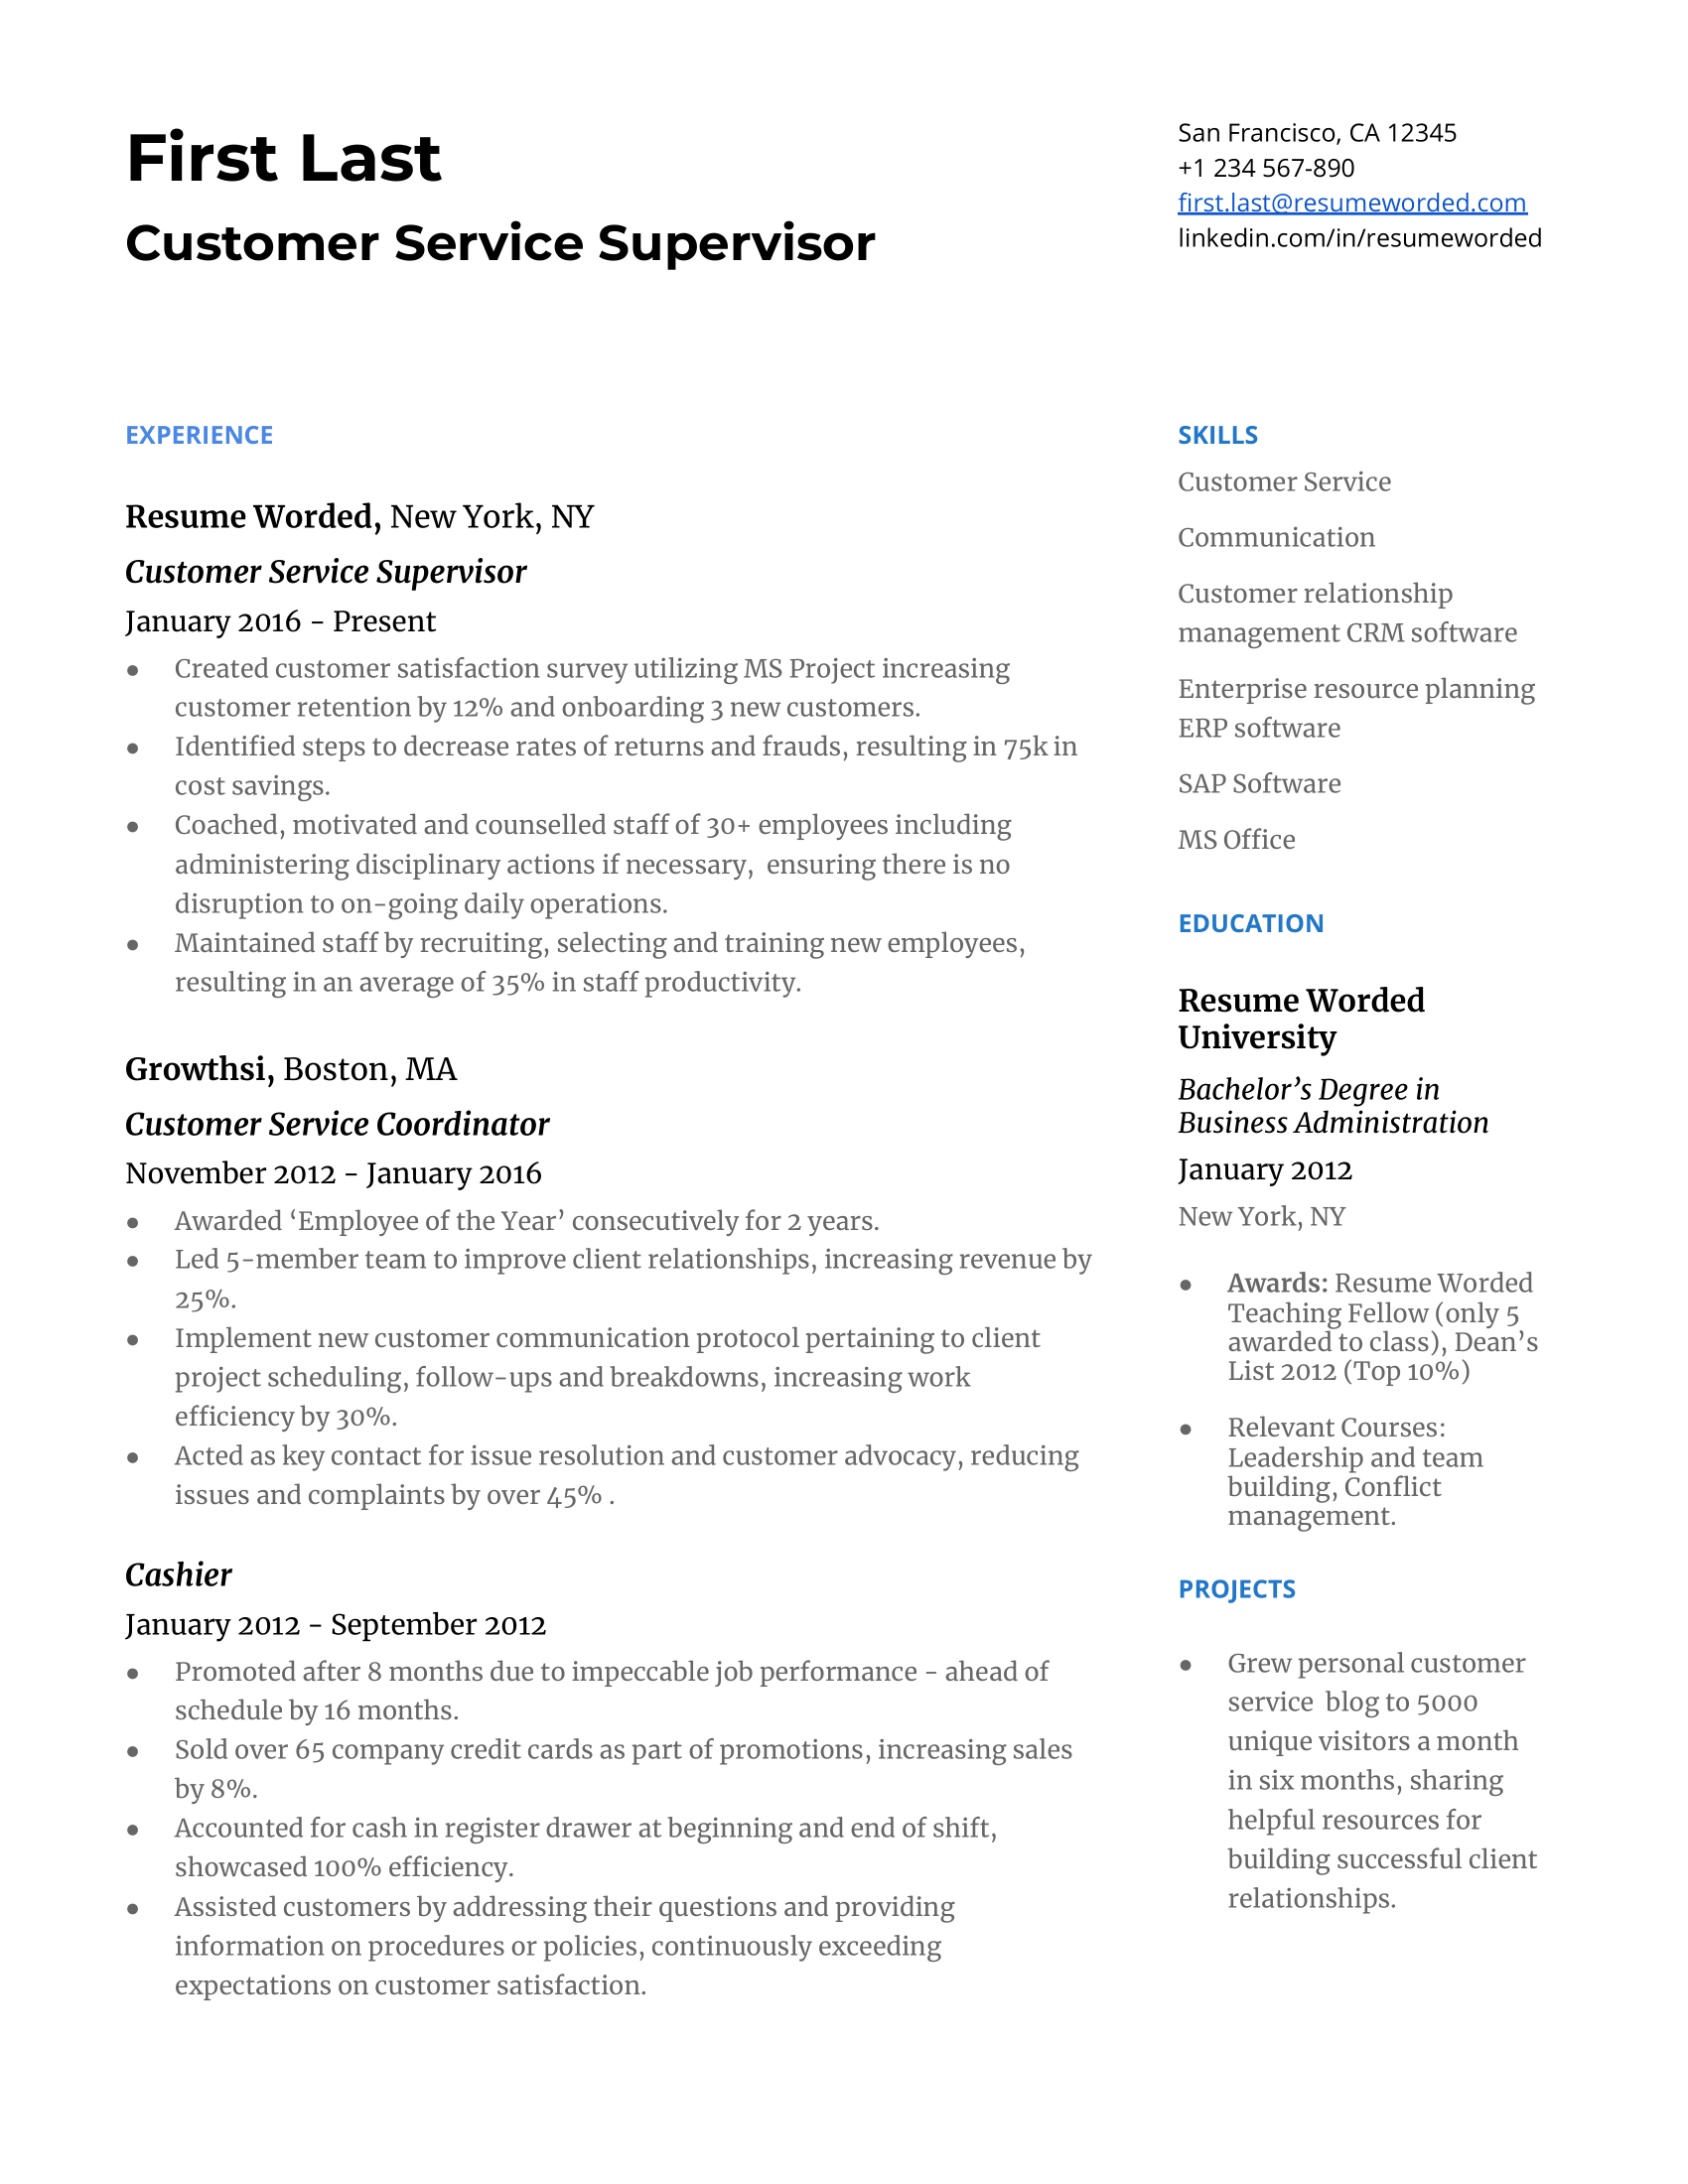 An example of a CV for a Customer Service Supervisor role.